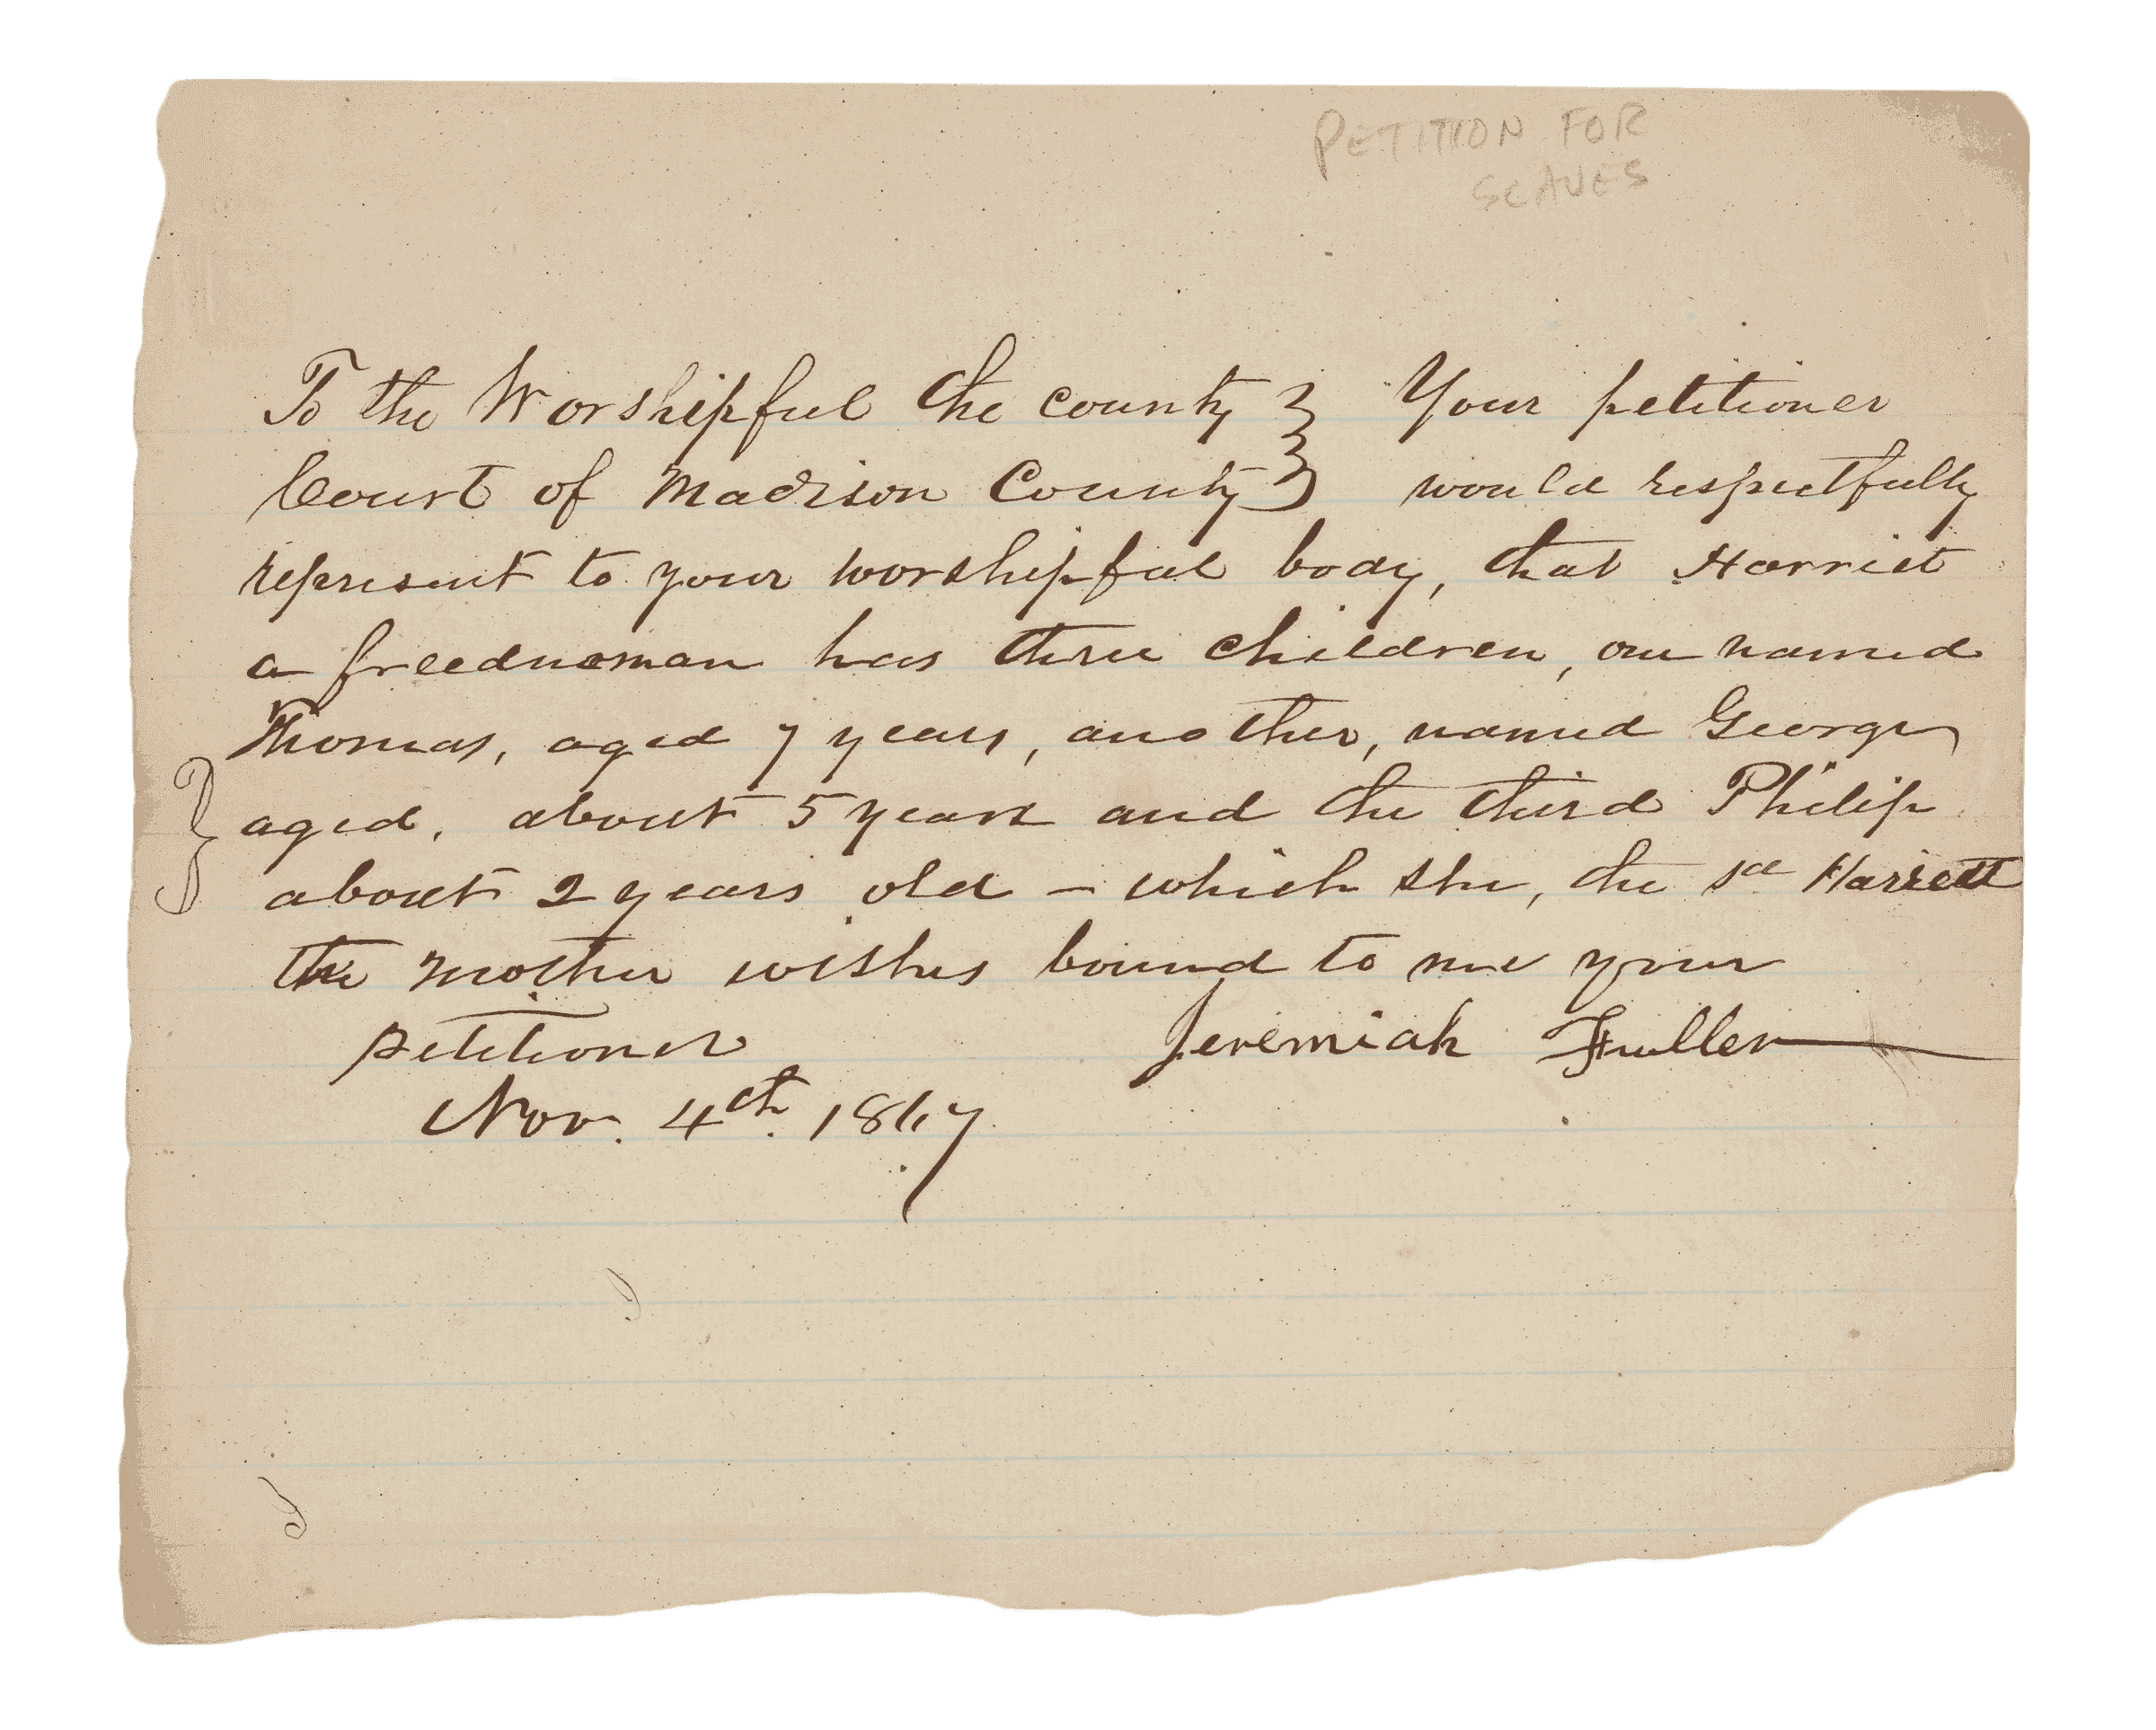 Handwritten petition requesting Harriet's children Thomas, George and Philip be bound to Jeremiah Fuller.